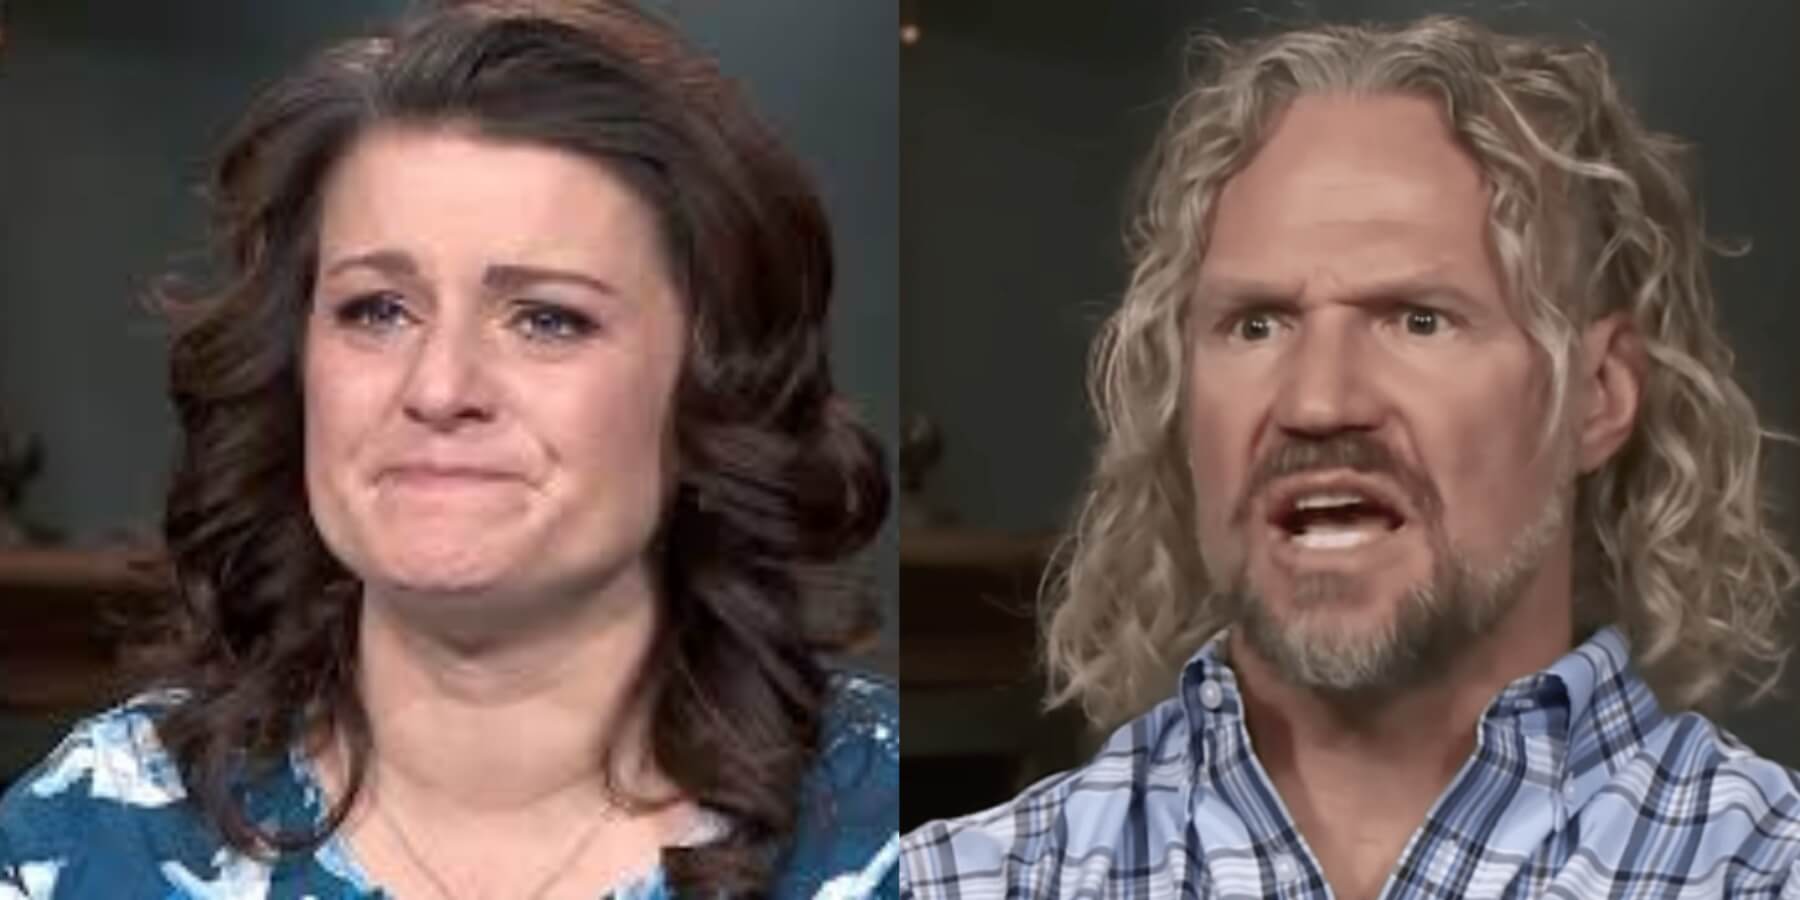 'Sister Wives' stars Robyn and Kody Brown in side-by-side images.